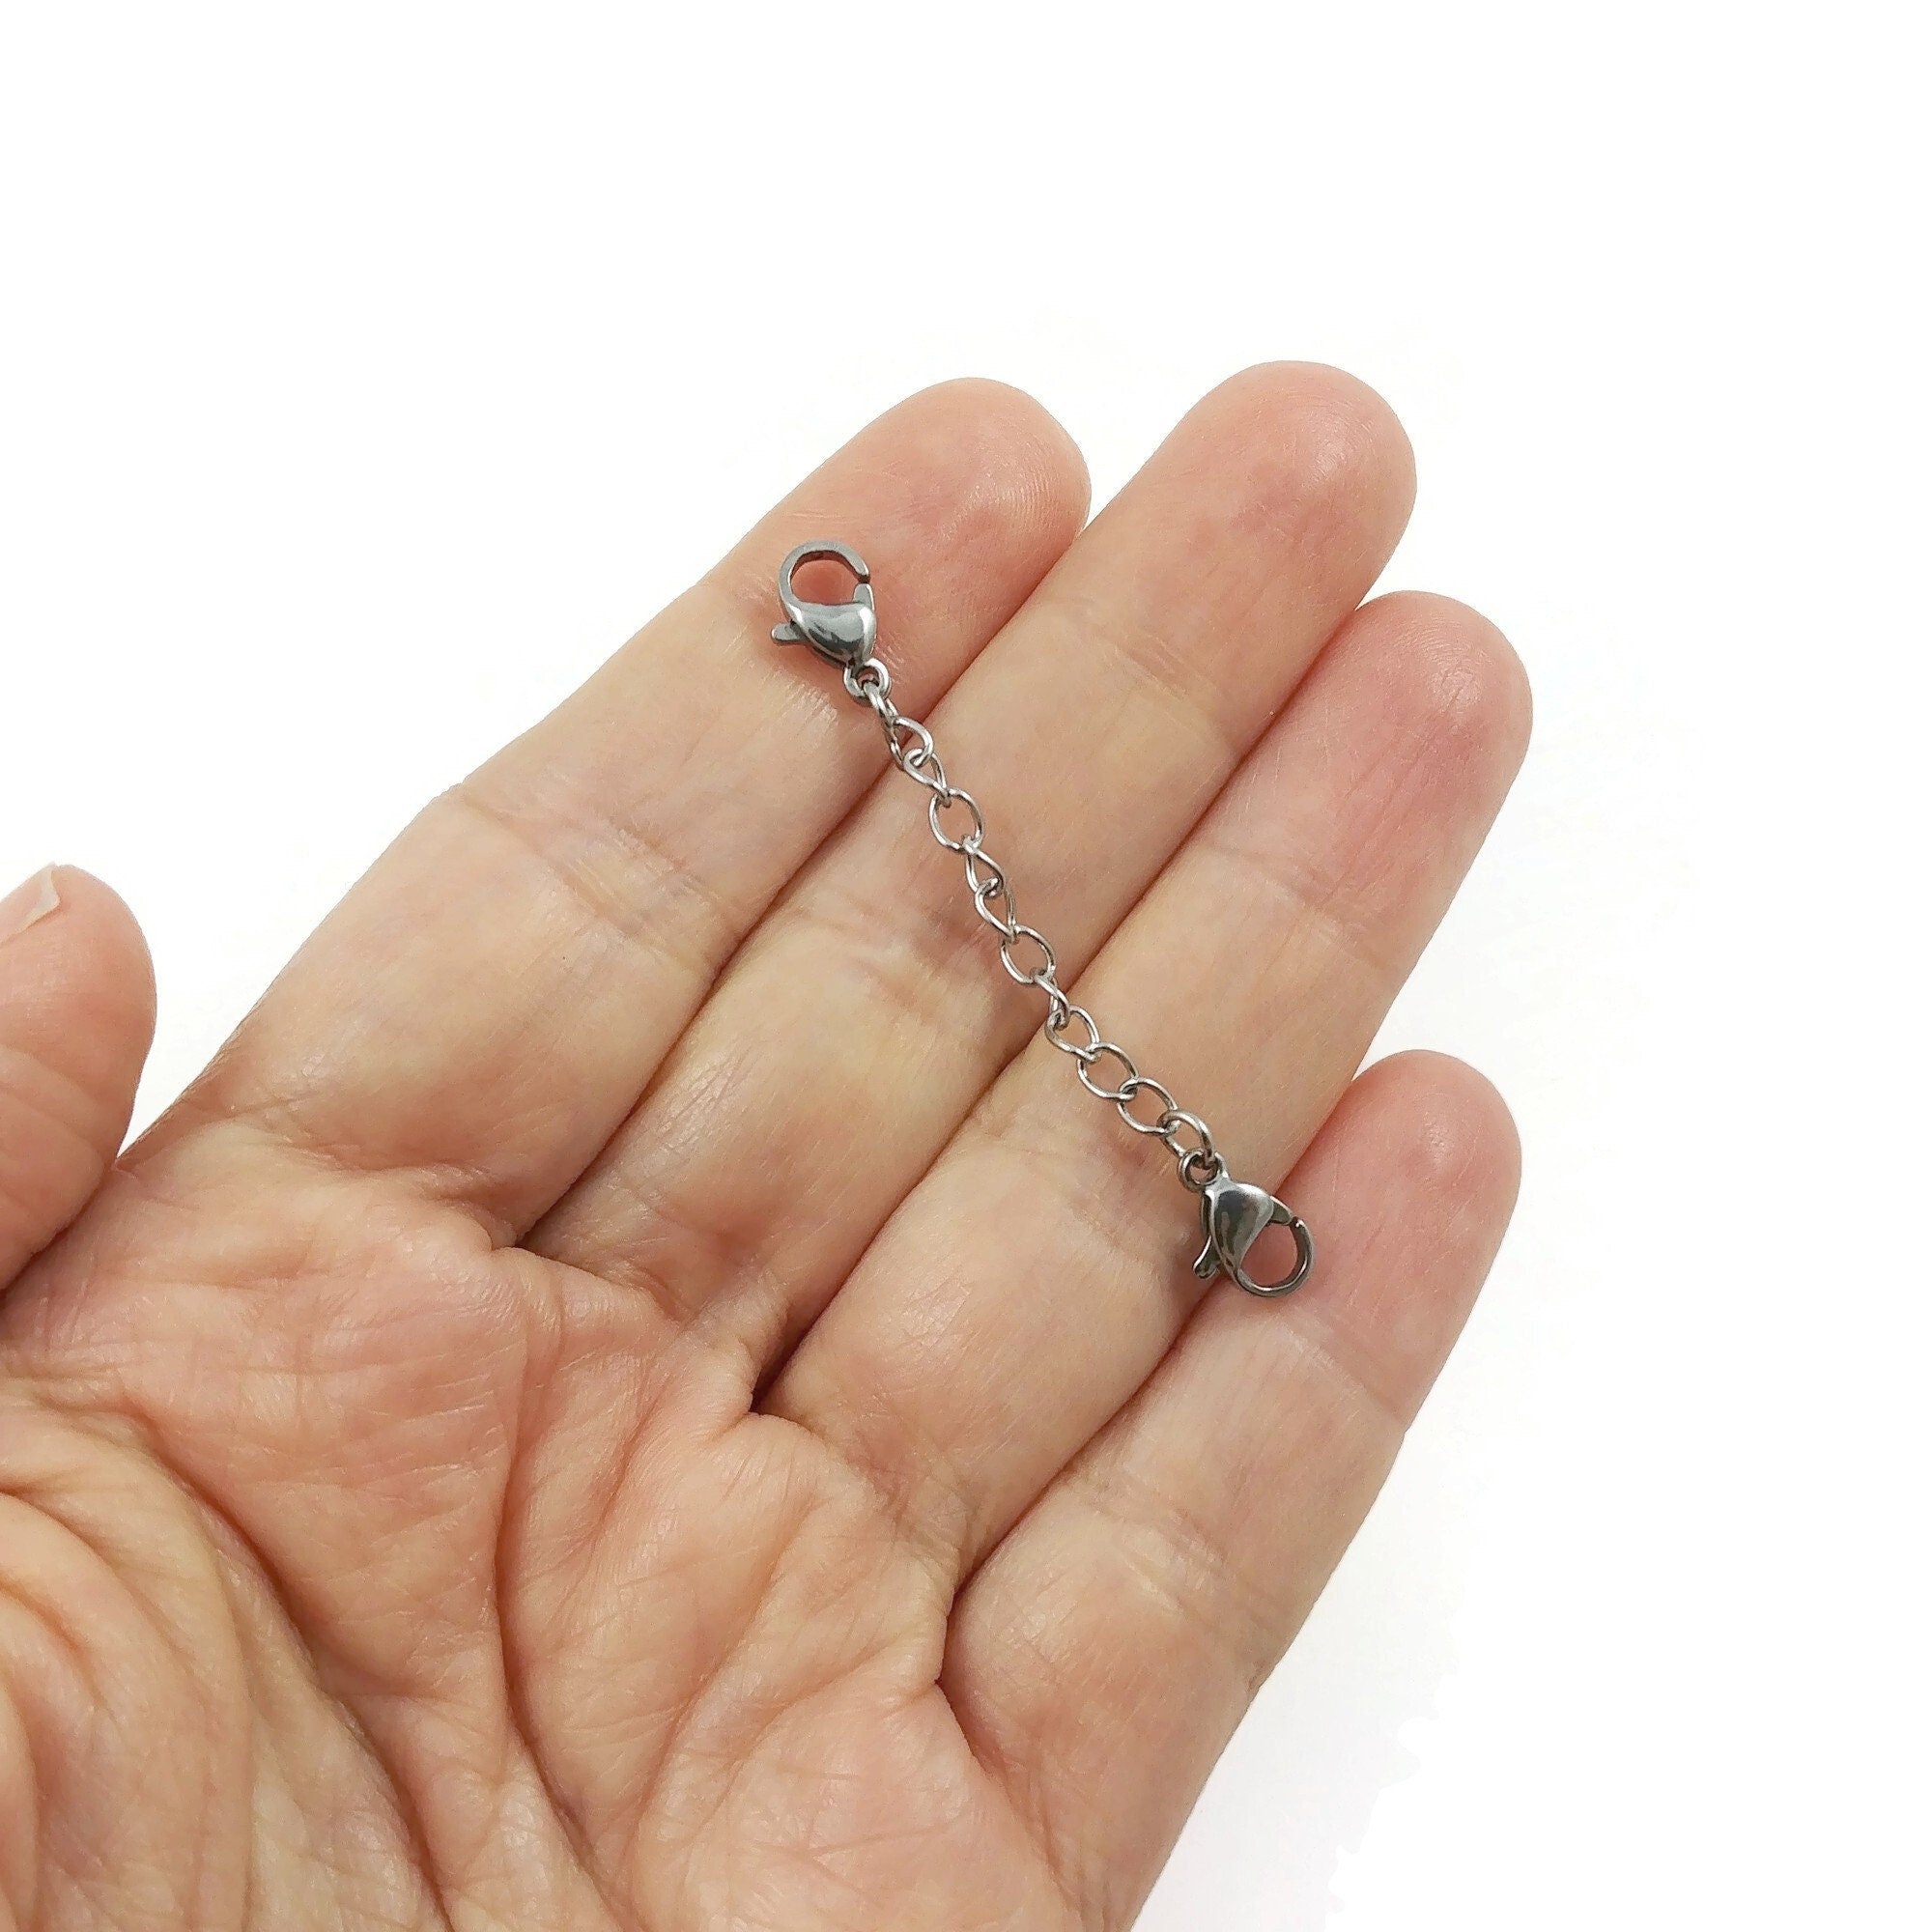 Silver Bracelet And Necklace Extender Chain